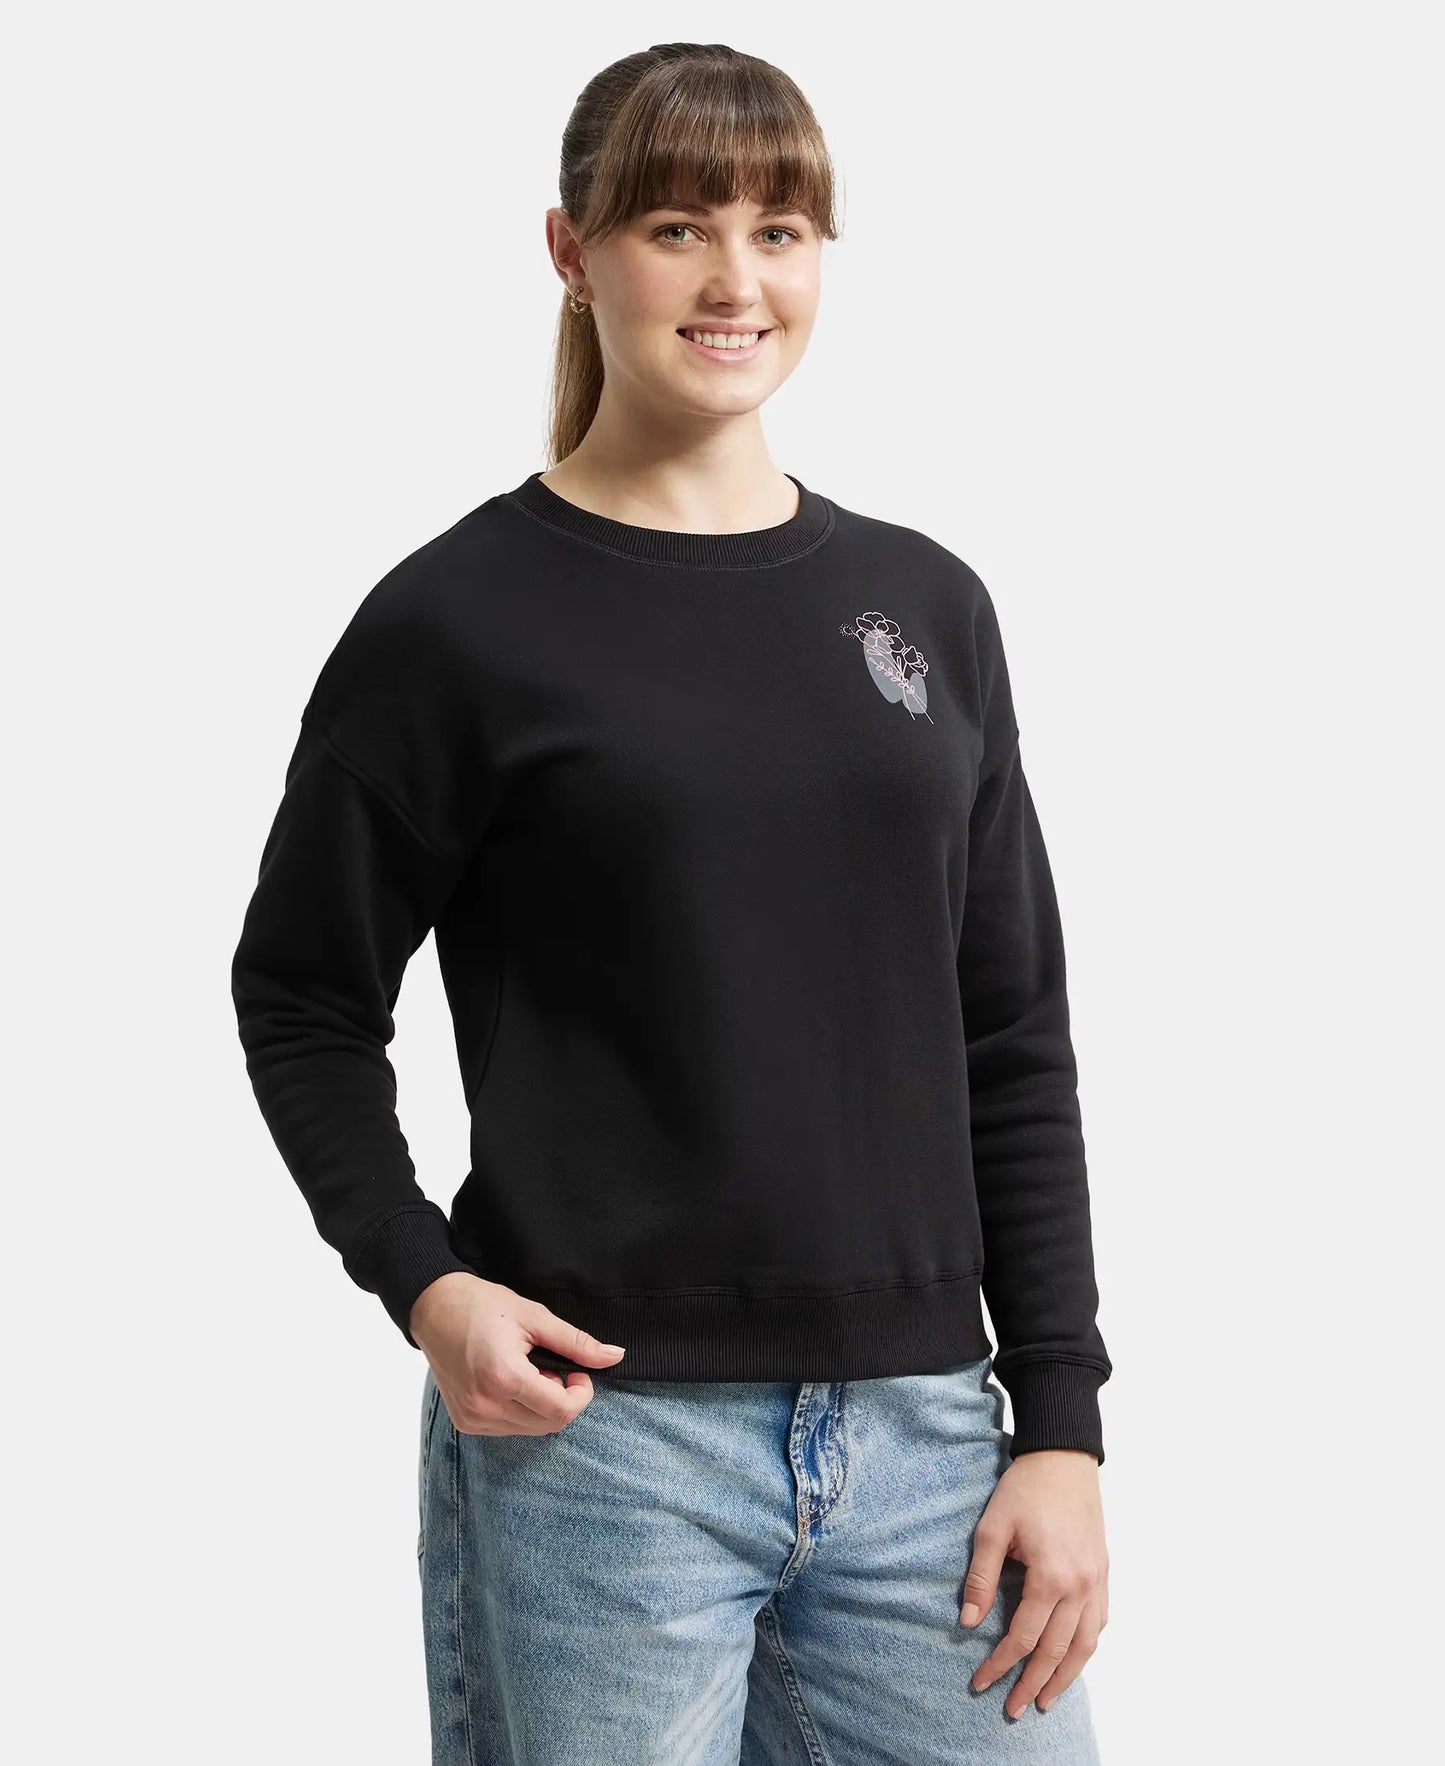 Super Combed Cotton Rich Fleece Fabric Printed Sweatshirt with Drop Shoulder Styling - Black-1